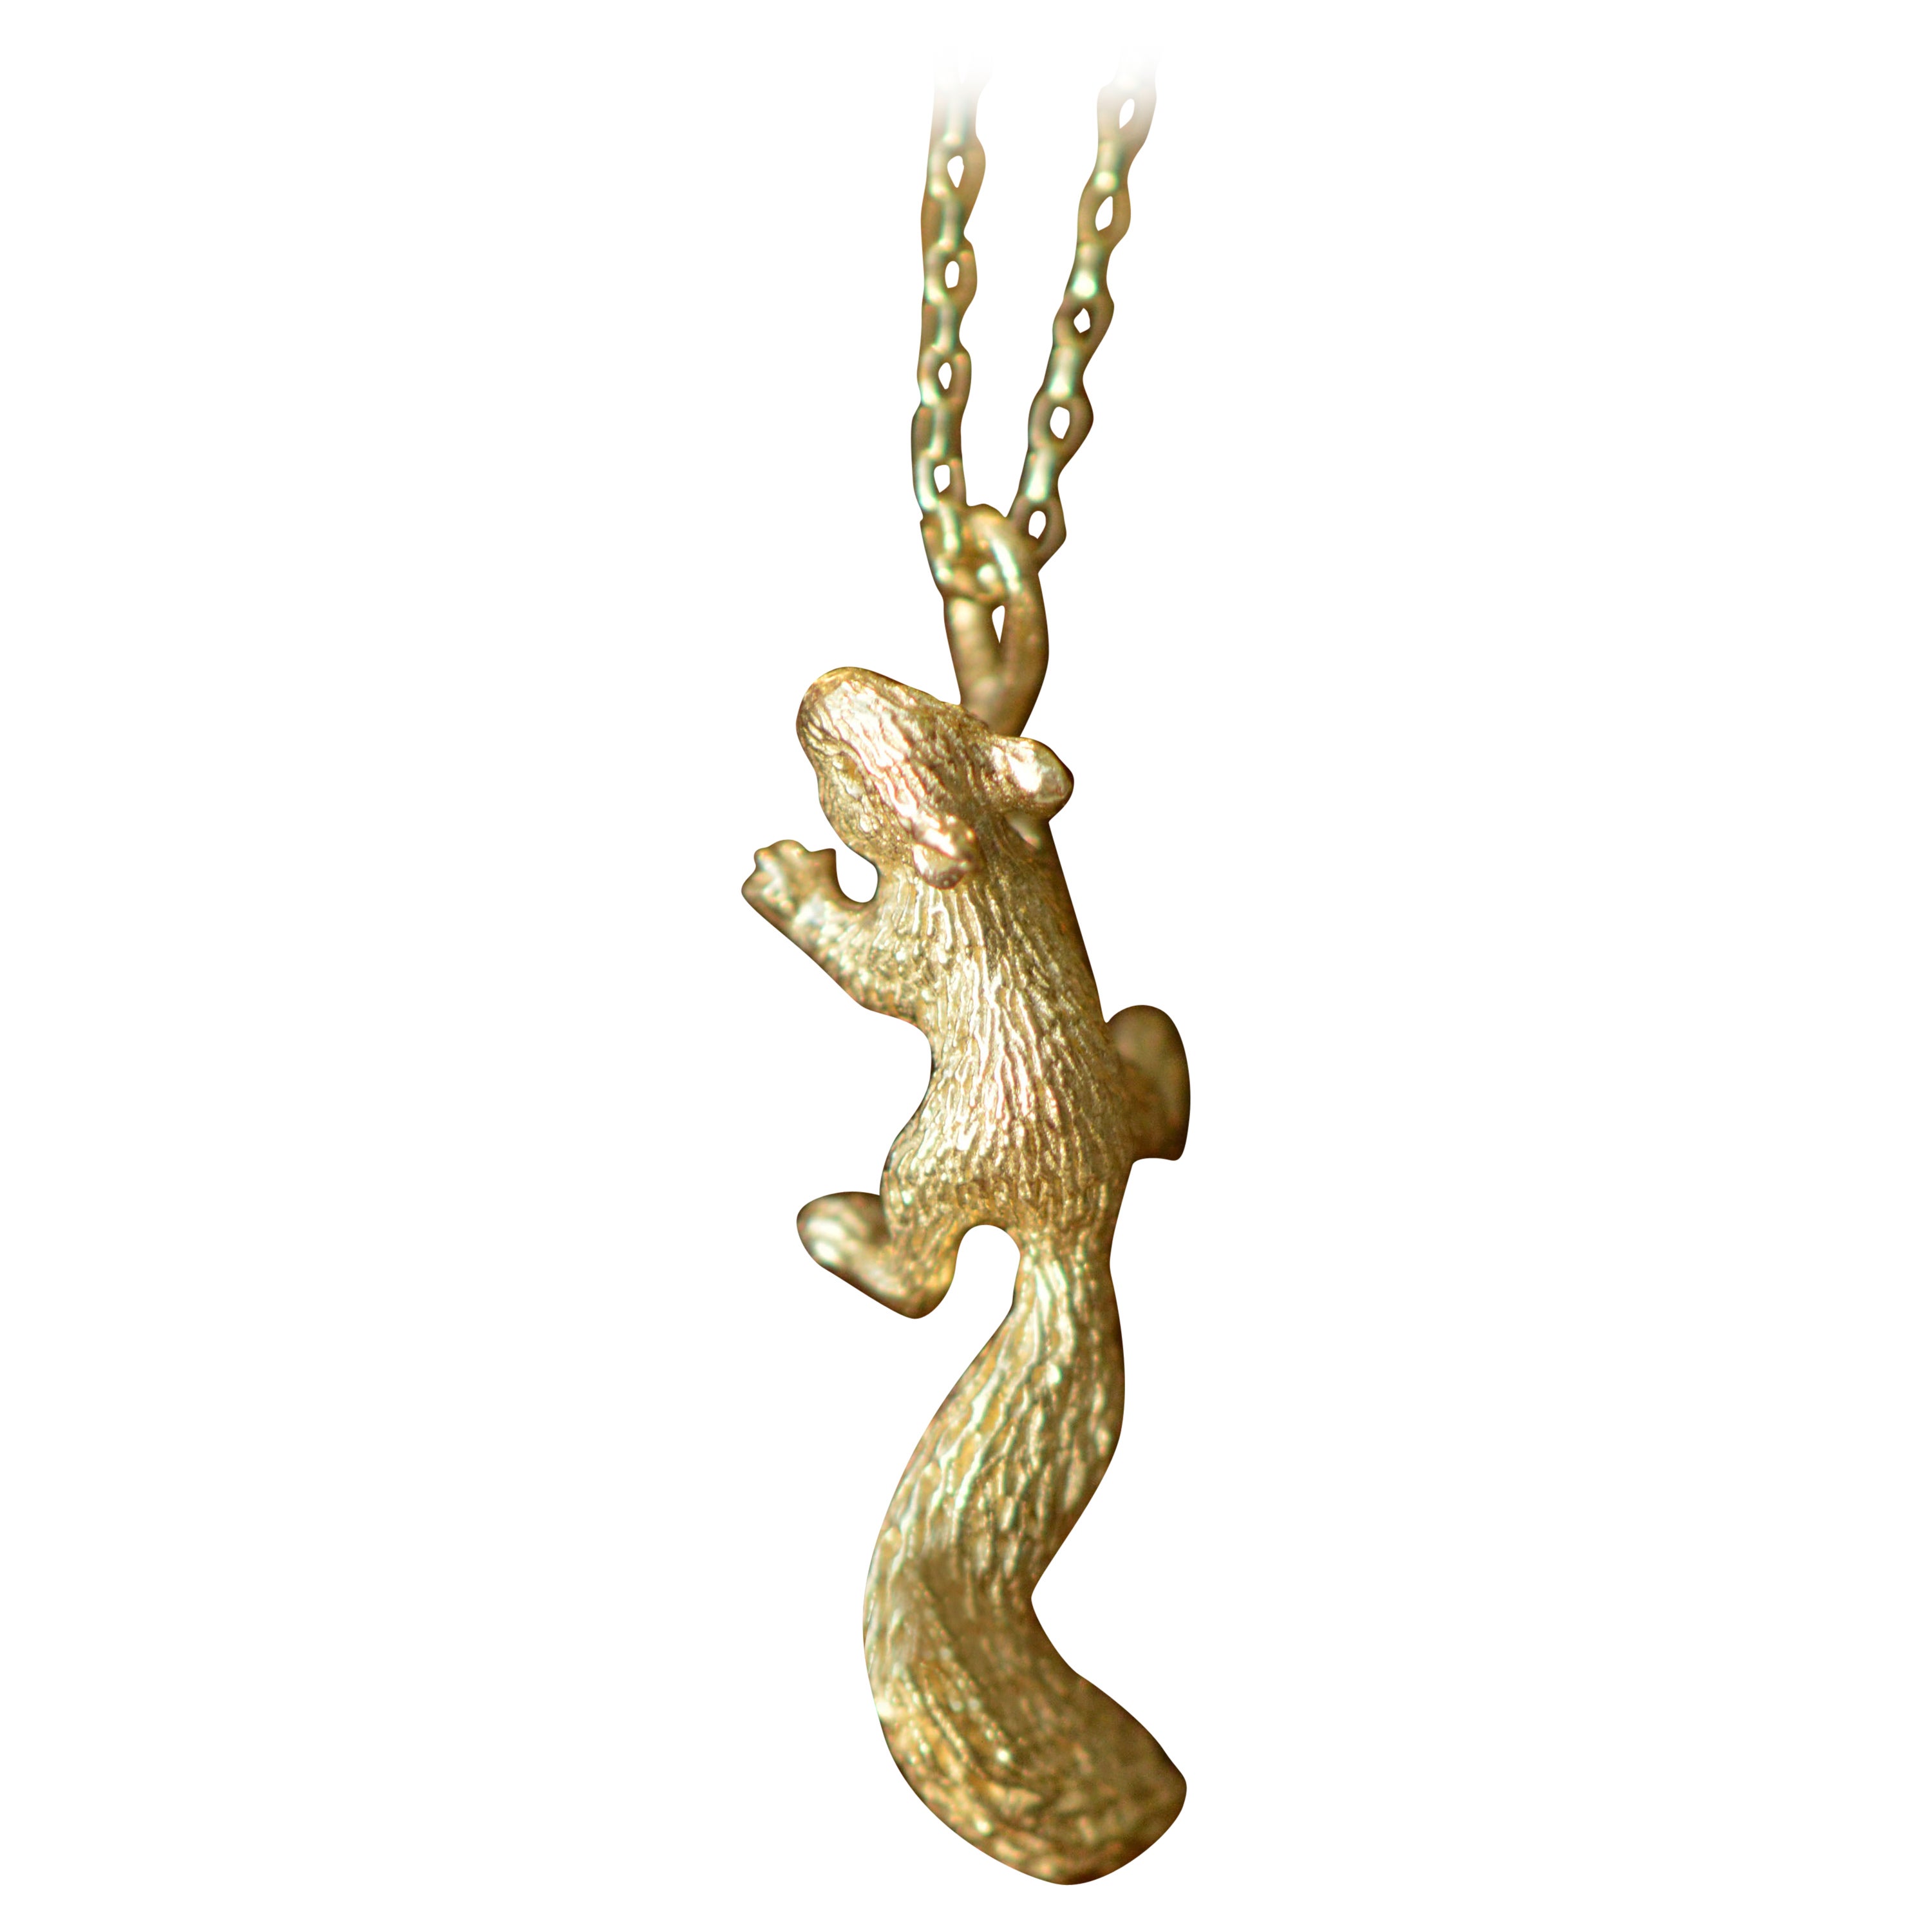 Solid 18 Carat Gold Baby Squirrel Pendant By Lucy Stopes-Roe For Sale